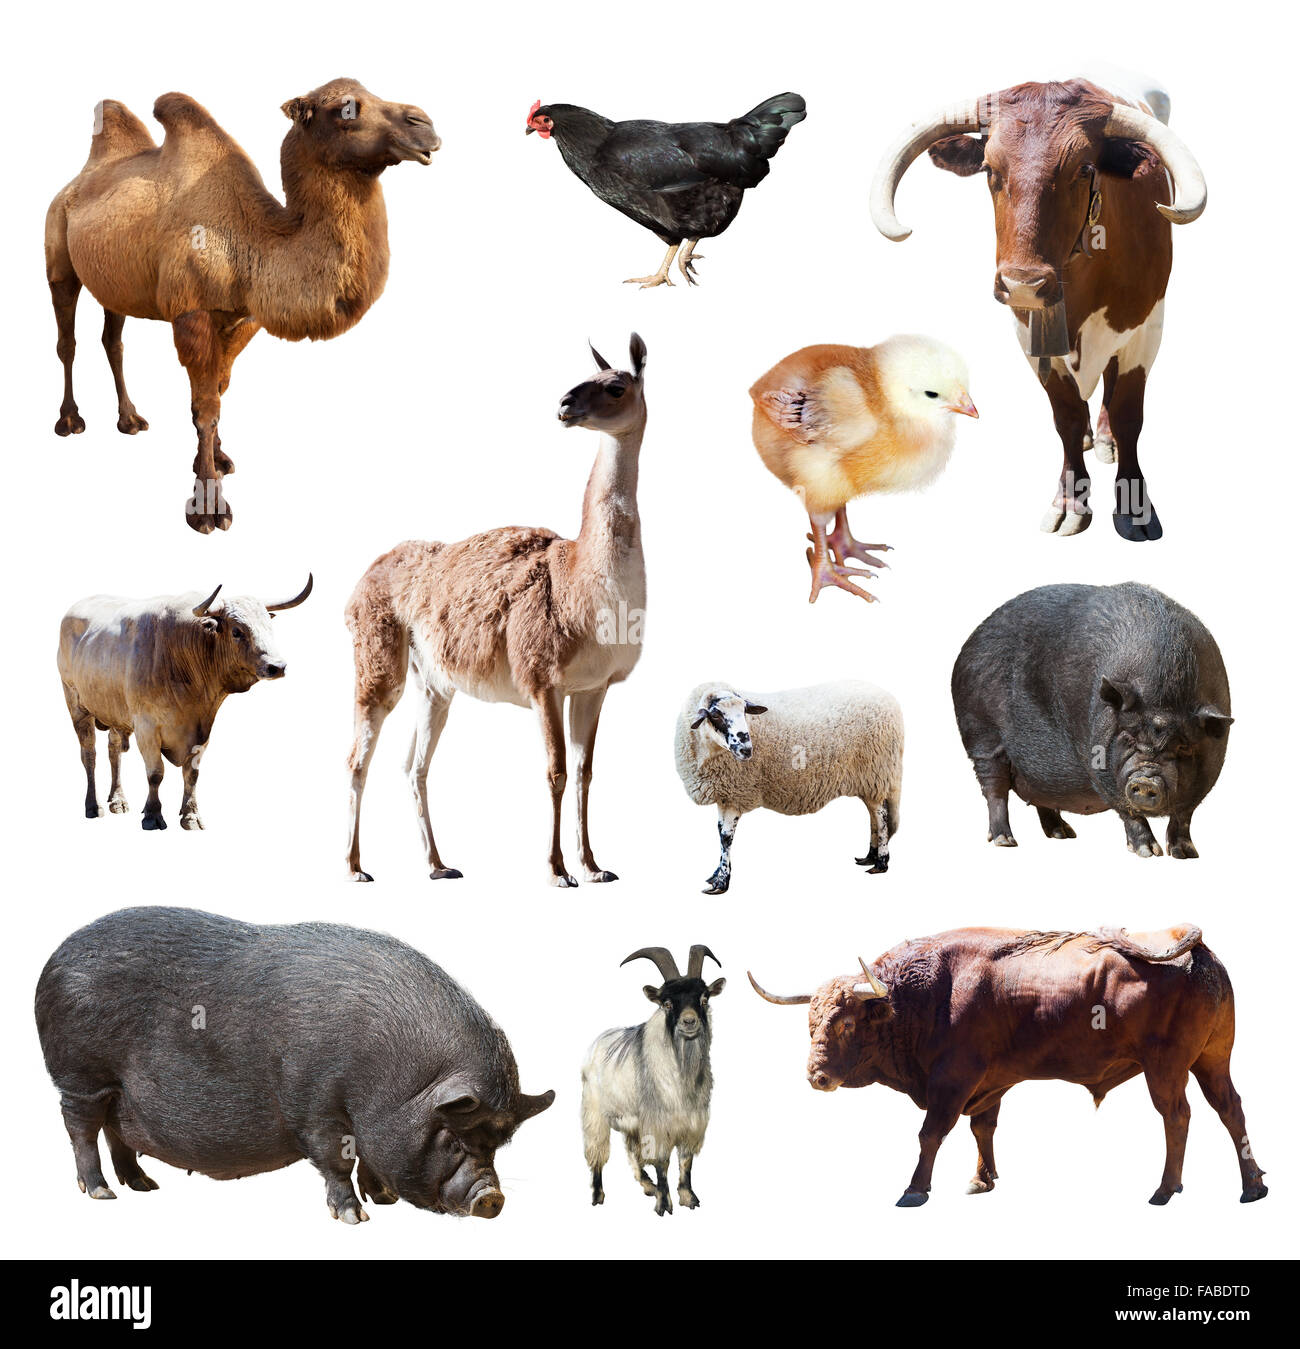 Set of bulls and other farm animals. Isolated over white background Stock Photo